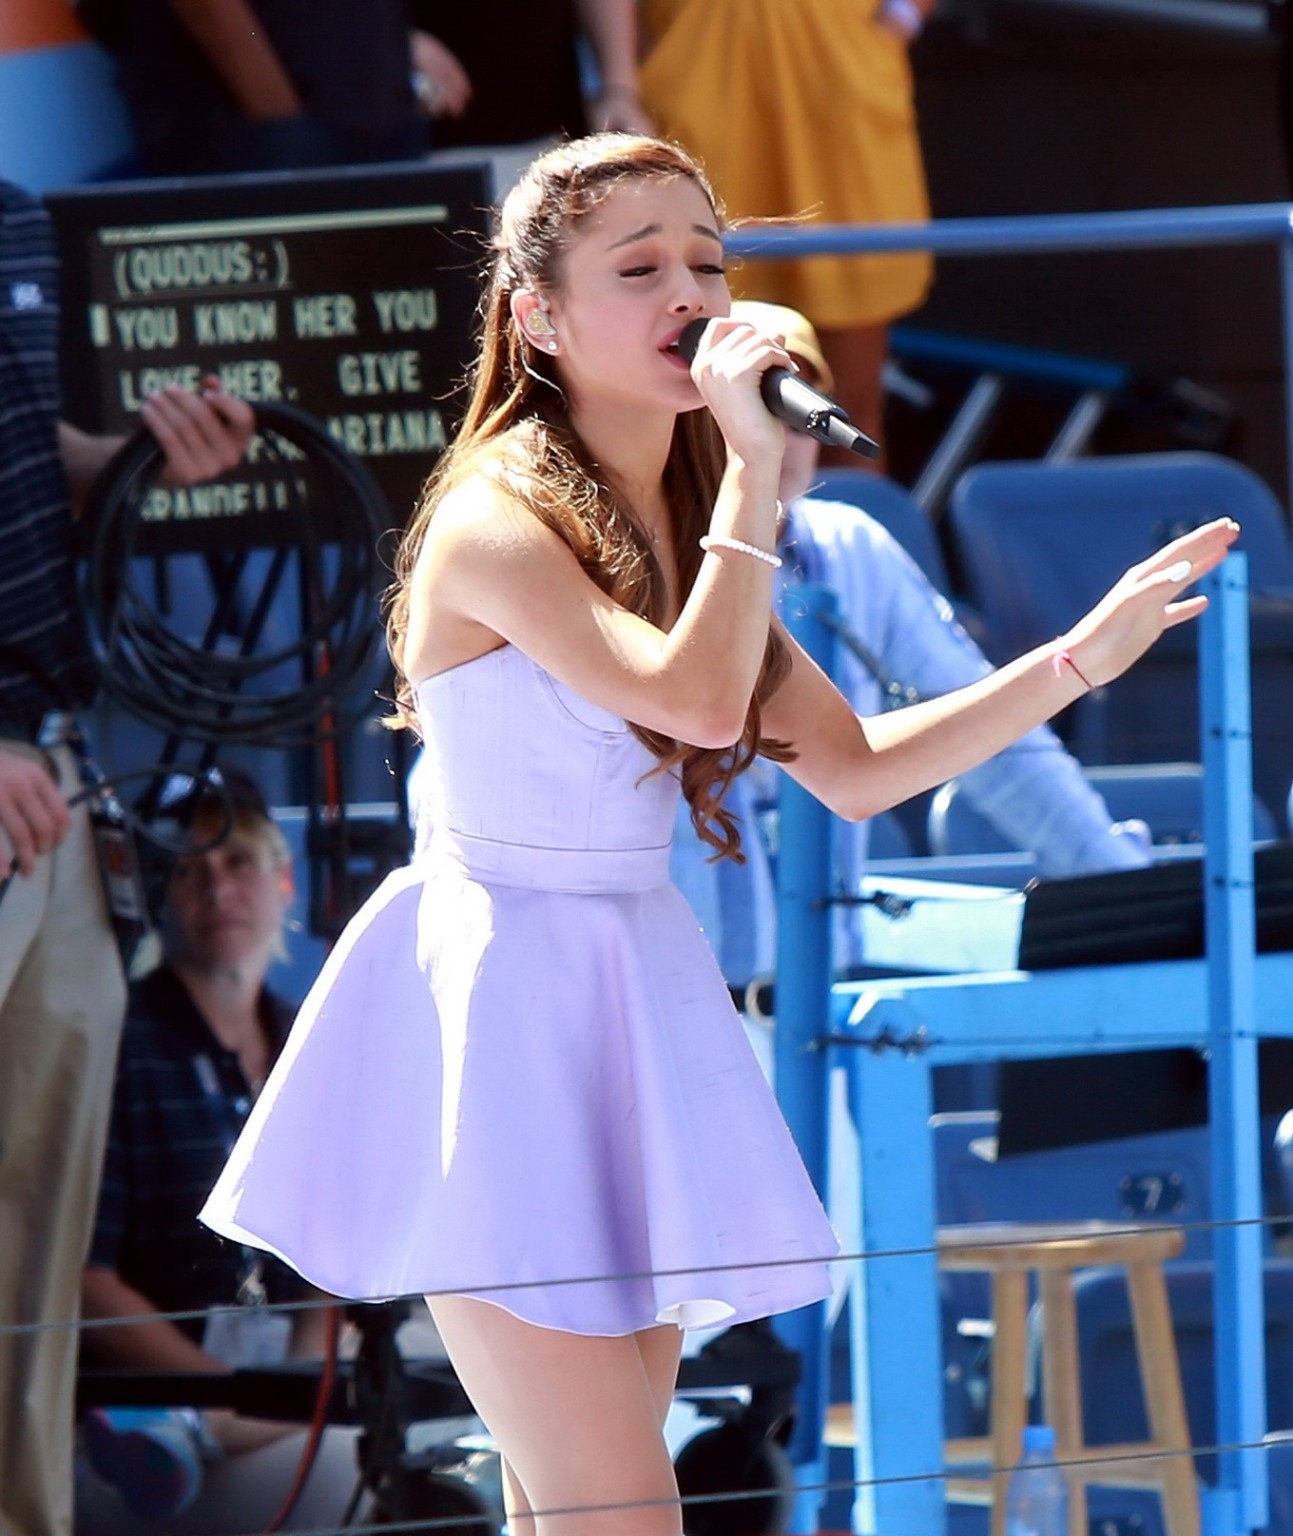 Ariana Grande leggy performing at the event in NYC #75221003